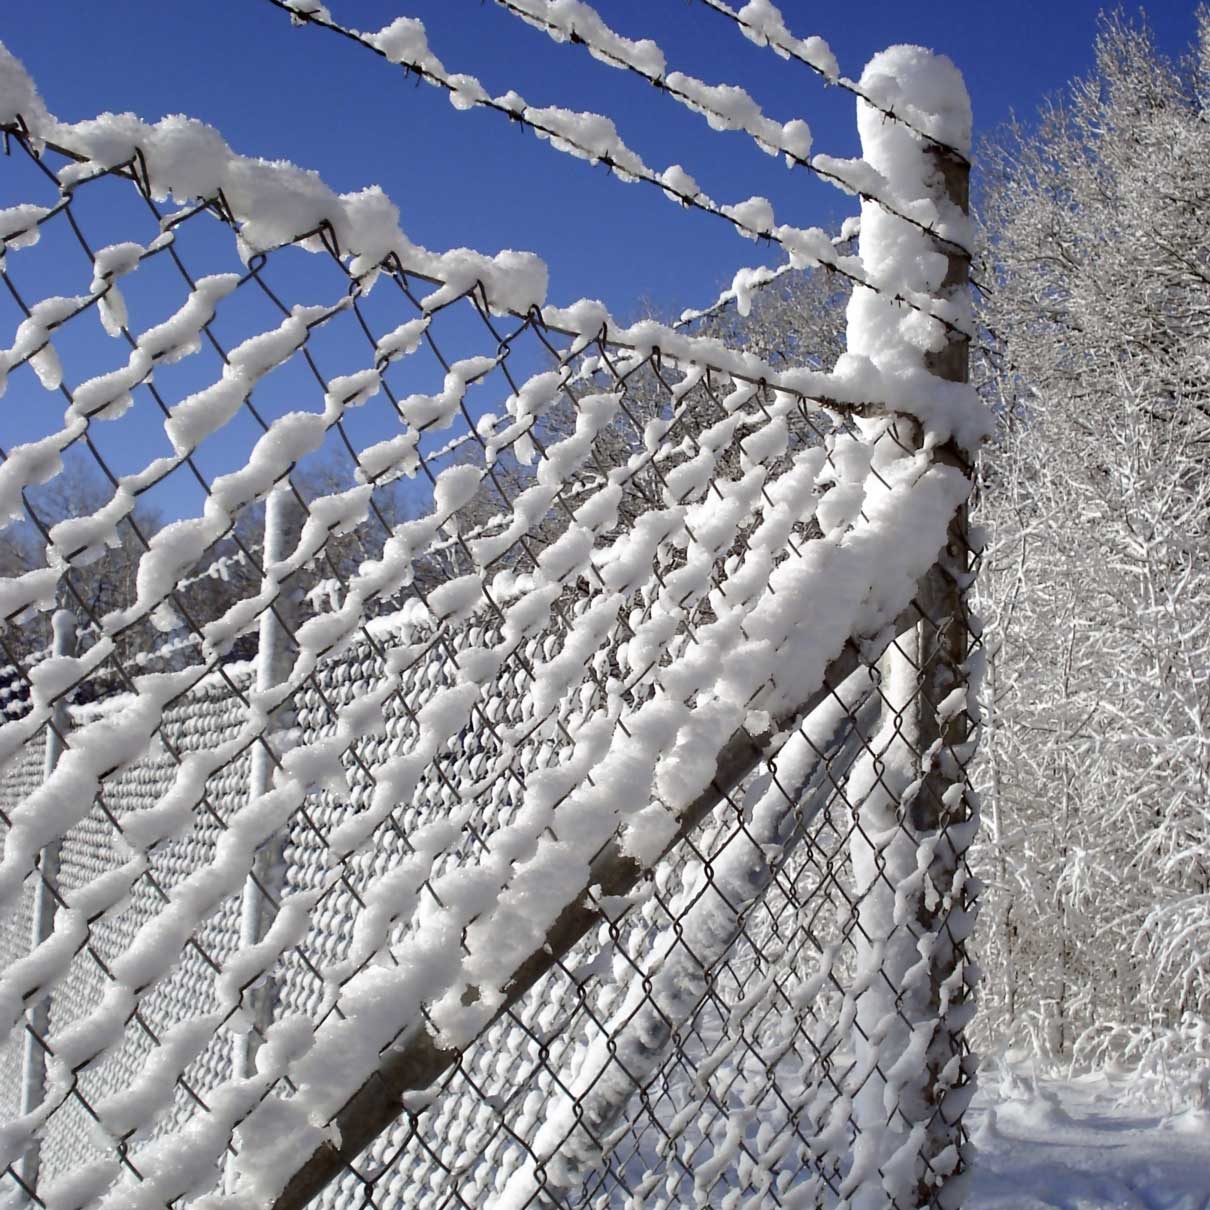 chain link fence netting zinc aluminium used for a fence in the snow